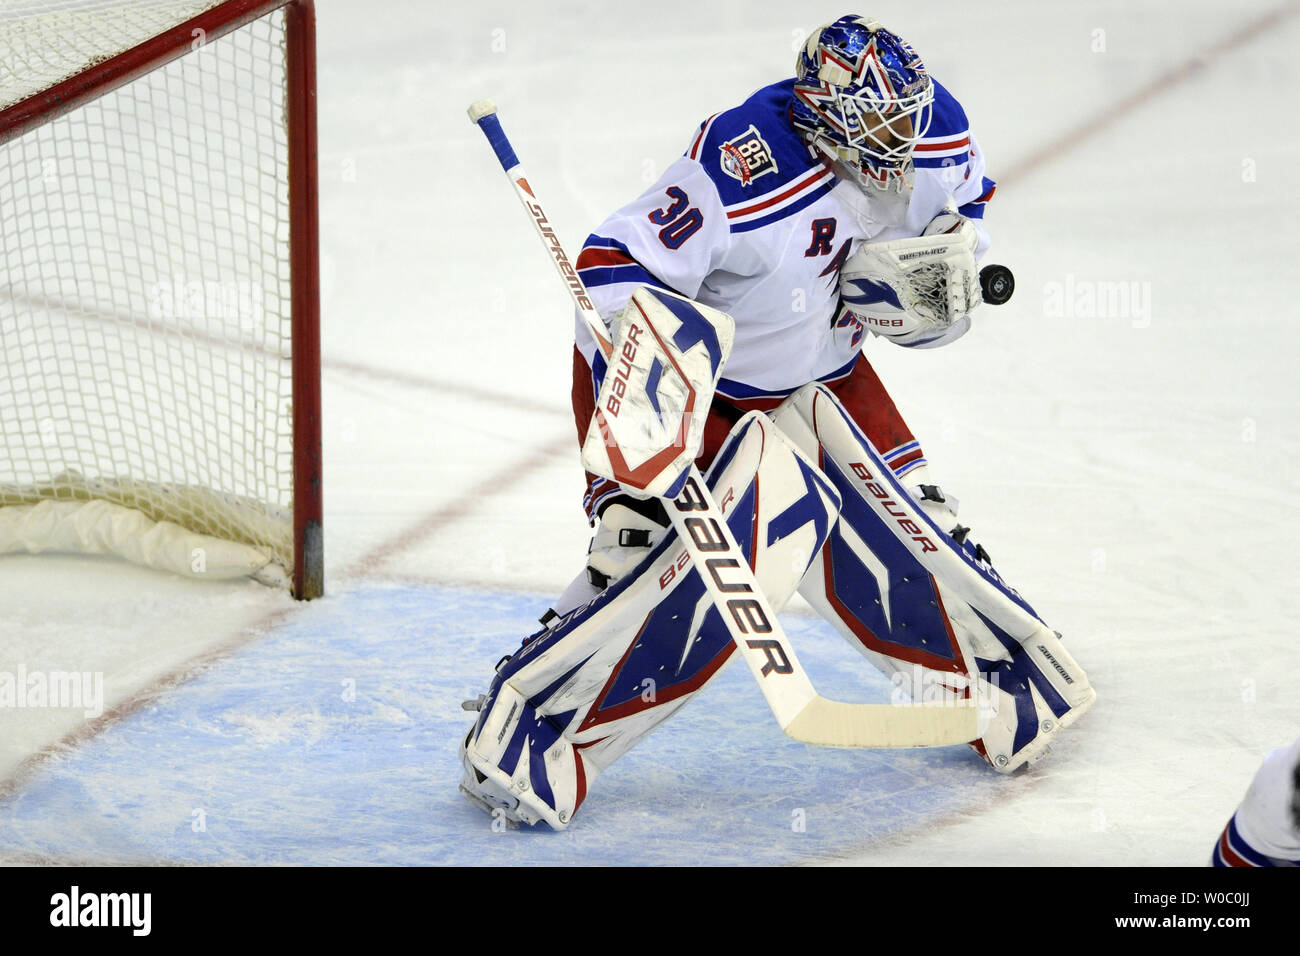 Henrik Lundqvist of the New York Rangers wearing his pinstrip pads News  Photo - Getty Images